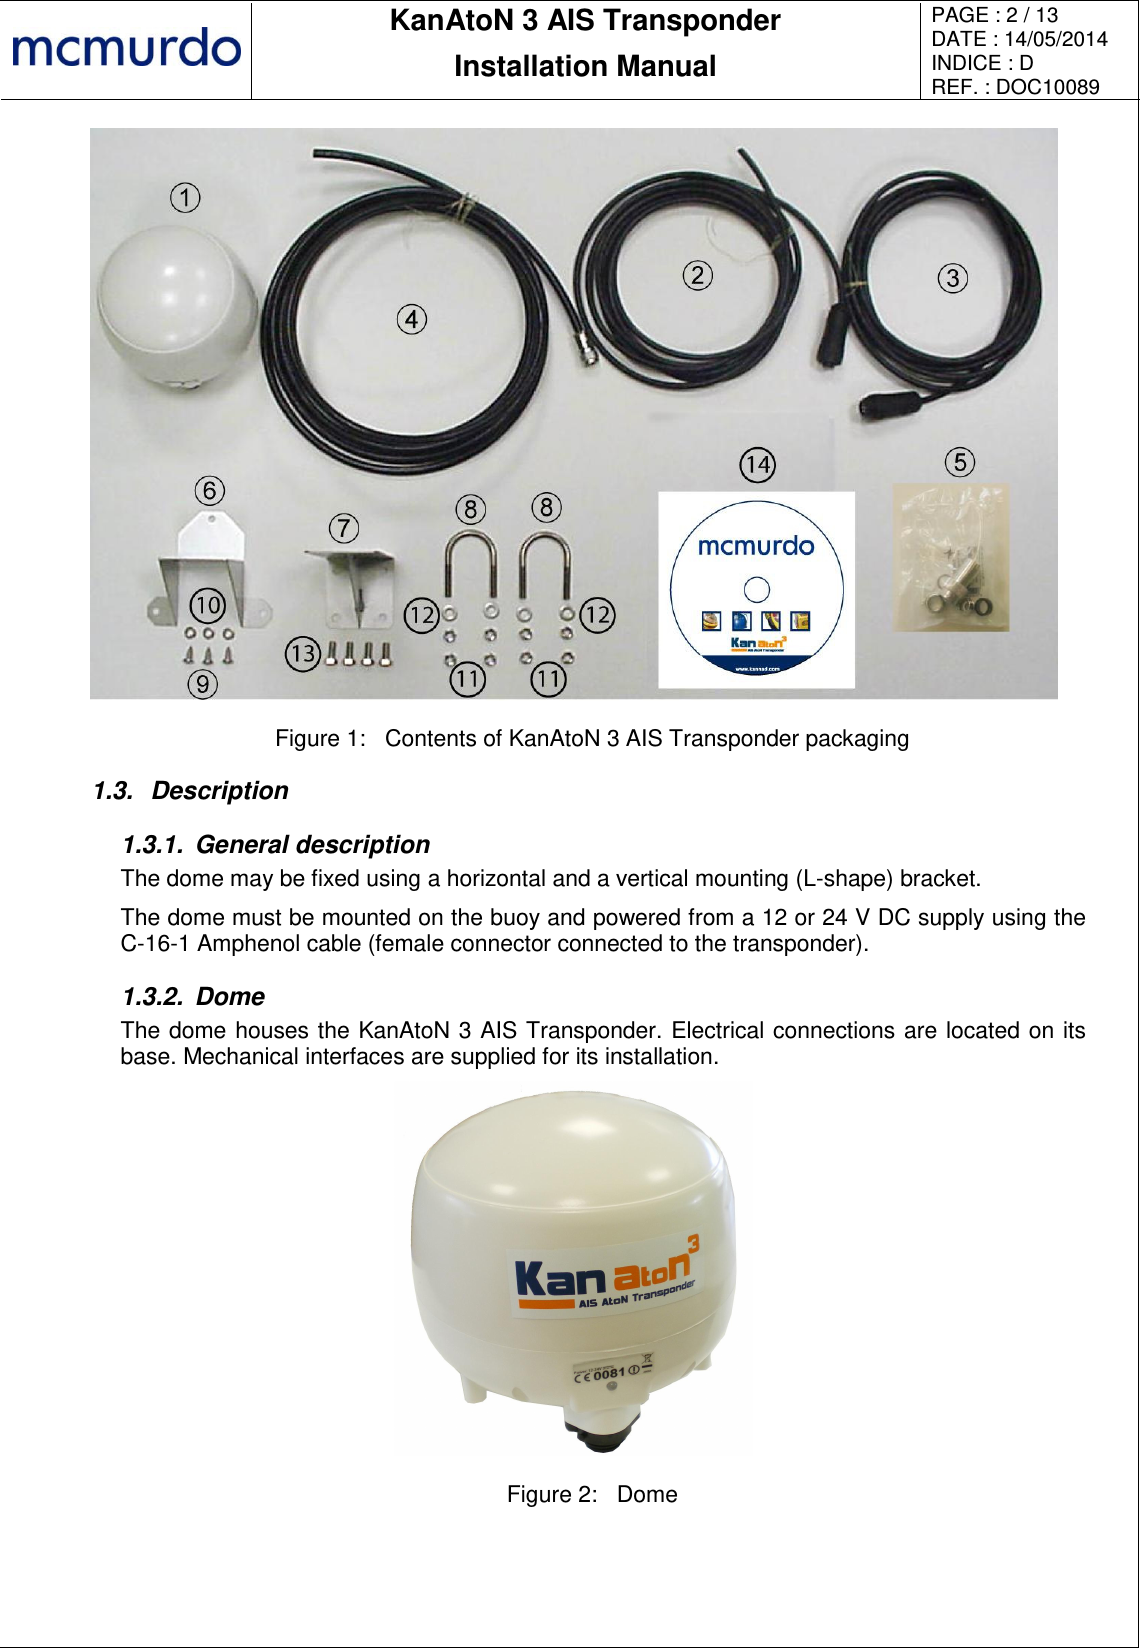       KanAtoN 3 AIS Transponder Installation Manual PAGE : 2 / 13 DATE : 14/05/2014 INDICE : D REF. : DOC10089    Figure 1:  Contents of KanAtoN 3 AIS Transponder packaging 1.3.  Description 1.3.1.  General description The dome may be fixed using a horizontal and a vertical mounting (L-shape) bracket. The dome must be mounted on the buoy and powered from a 12 or 24 V DC supply using the C-16-1 Amphenol cable (female connector connected to the transponder). 1.3.2.  Dome The dome houses the KanAtoN 3 AIS Transponder. Electrical connections are located on its base. Mechanical interfaces are supplied for its installation.  Figure 2:  Dome  